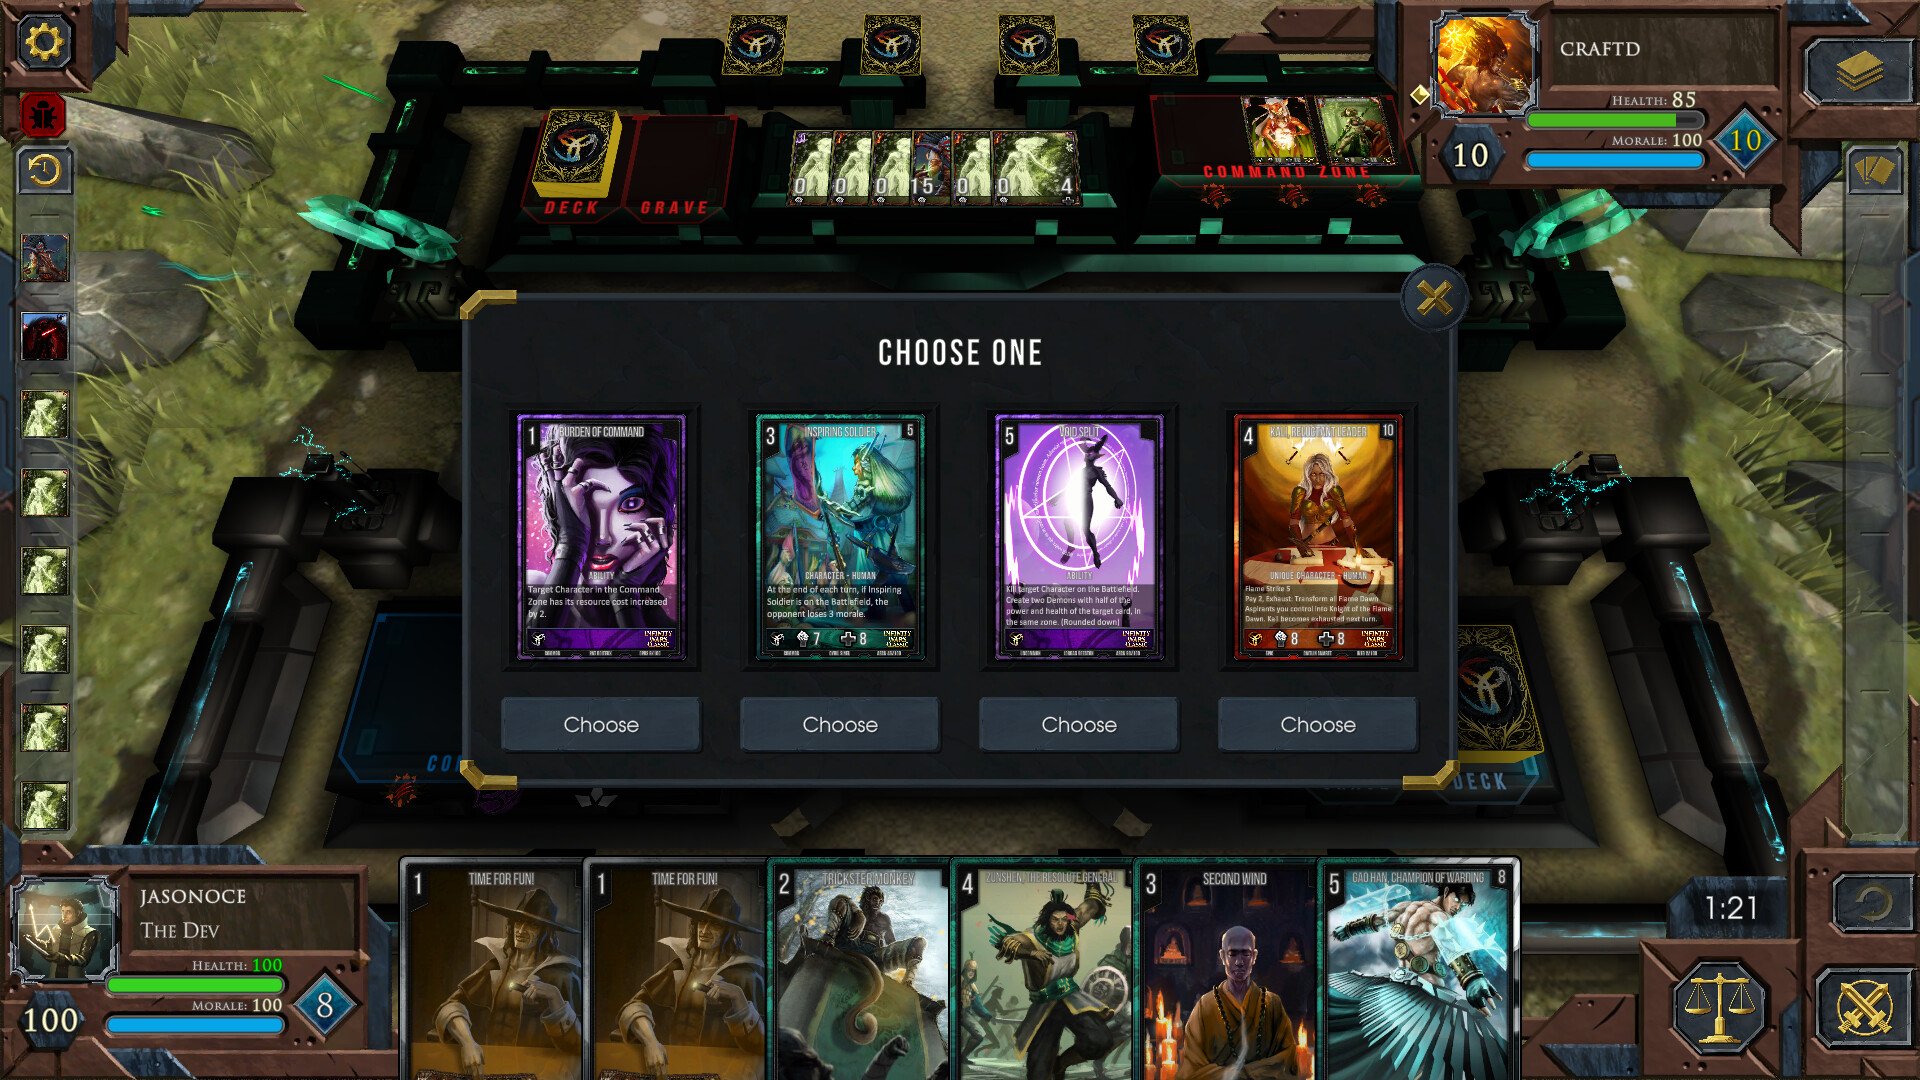 Infinity Wars: Animated Trading Card Game on Steam